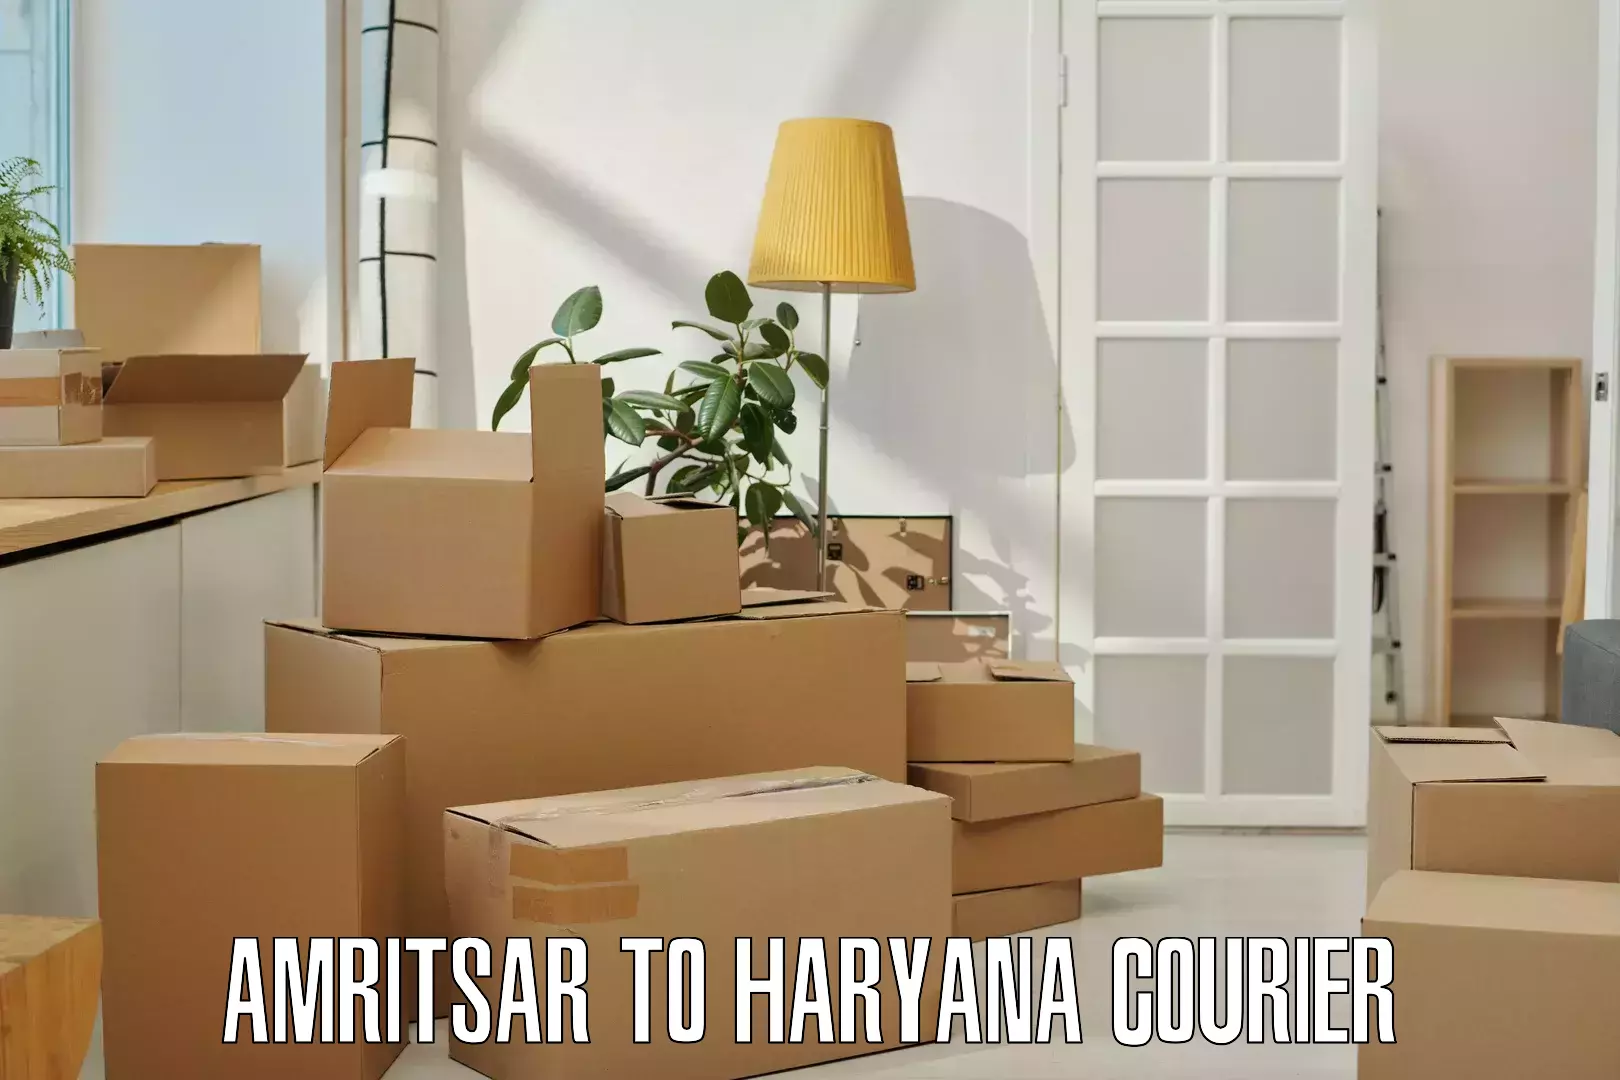 Express package services Amritsar to Haryana